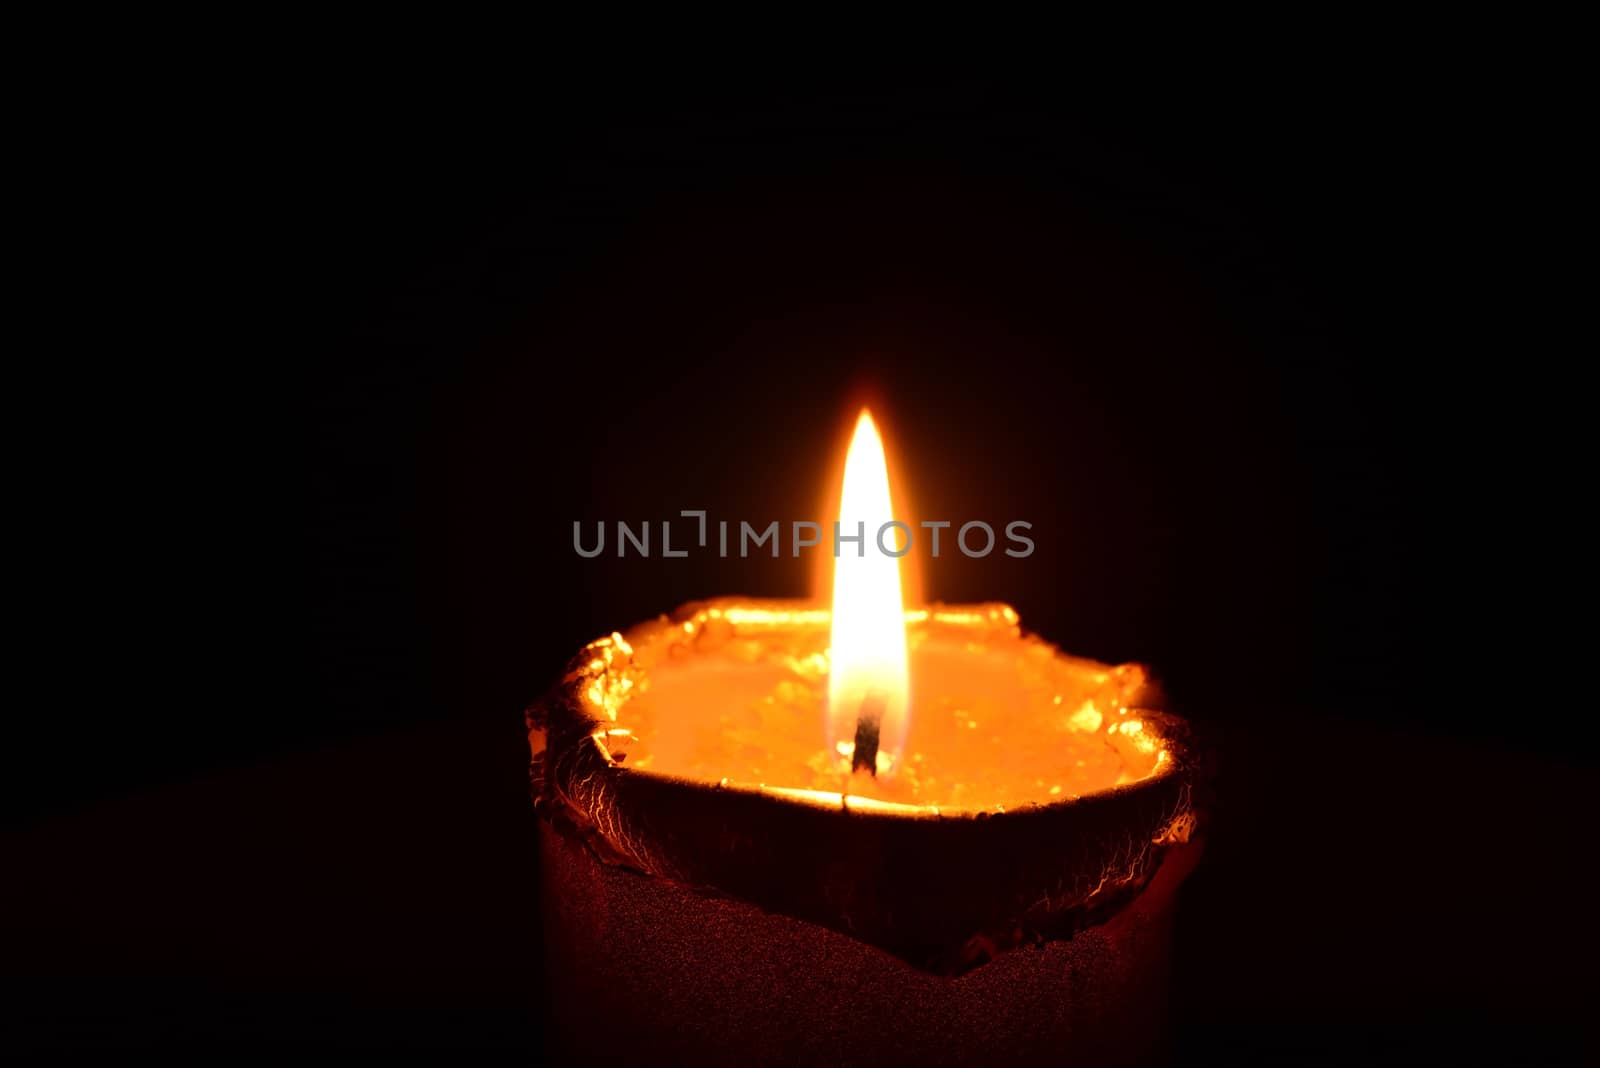 Golden candle burning on a black background by dk_photos